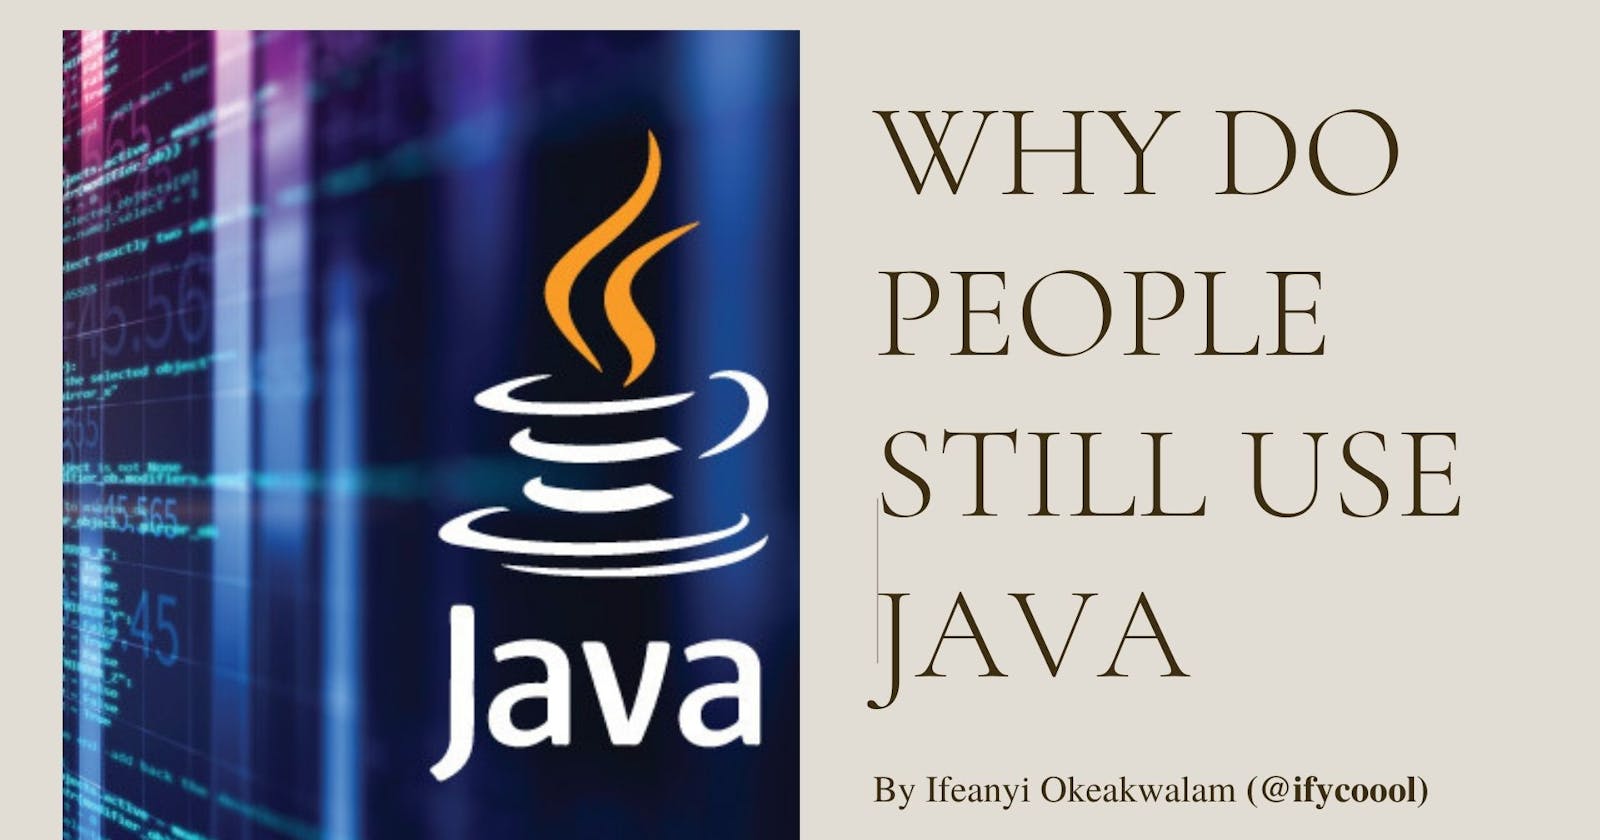 Why do people still use Java, if Java is behind technologically